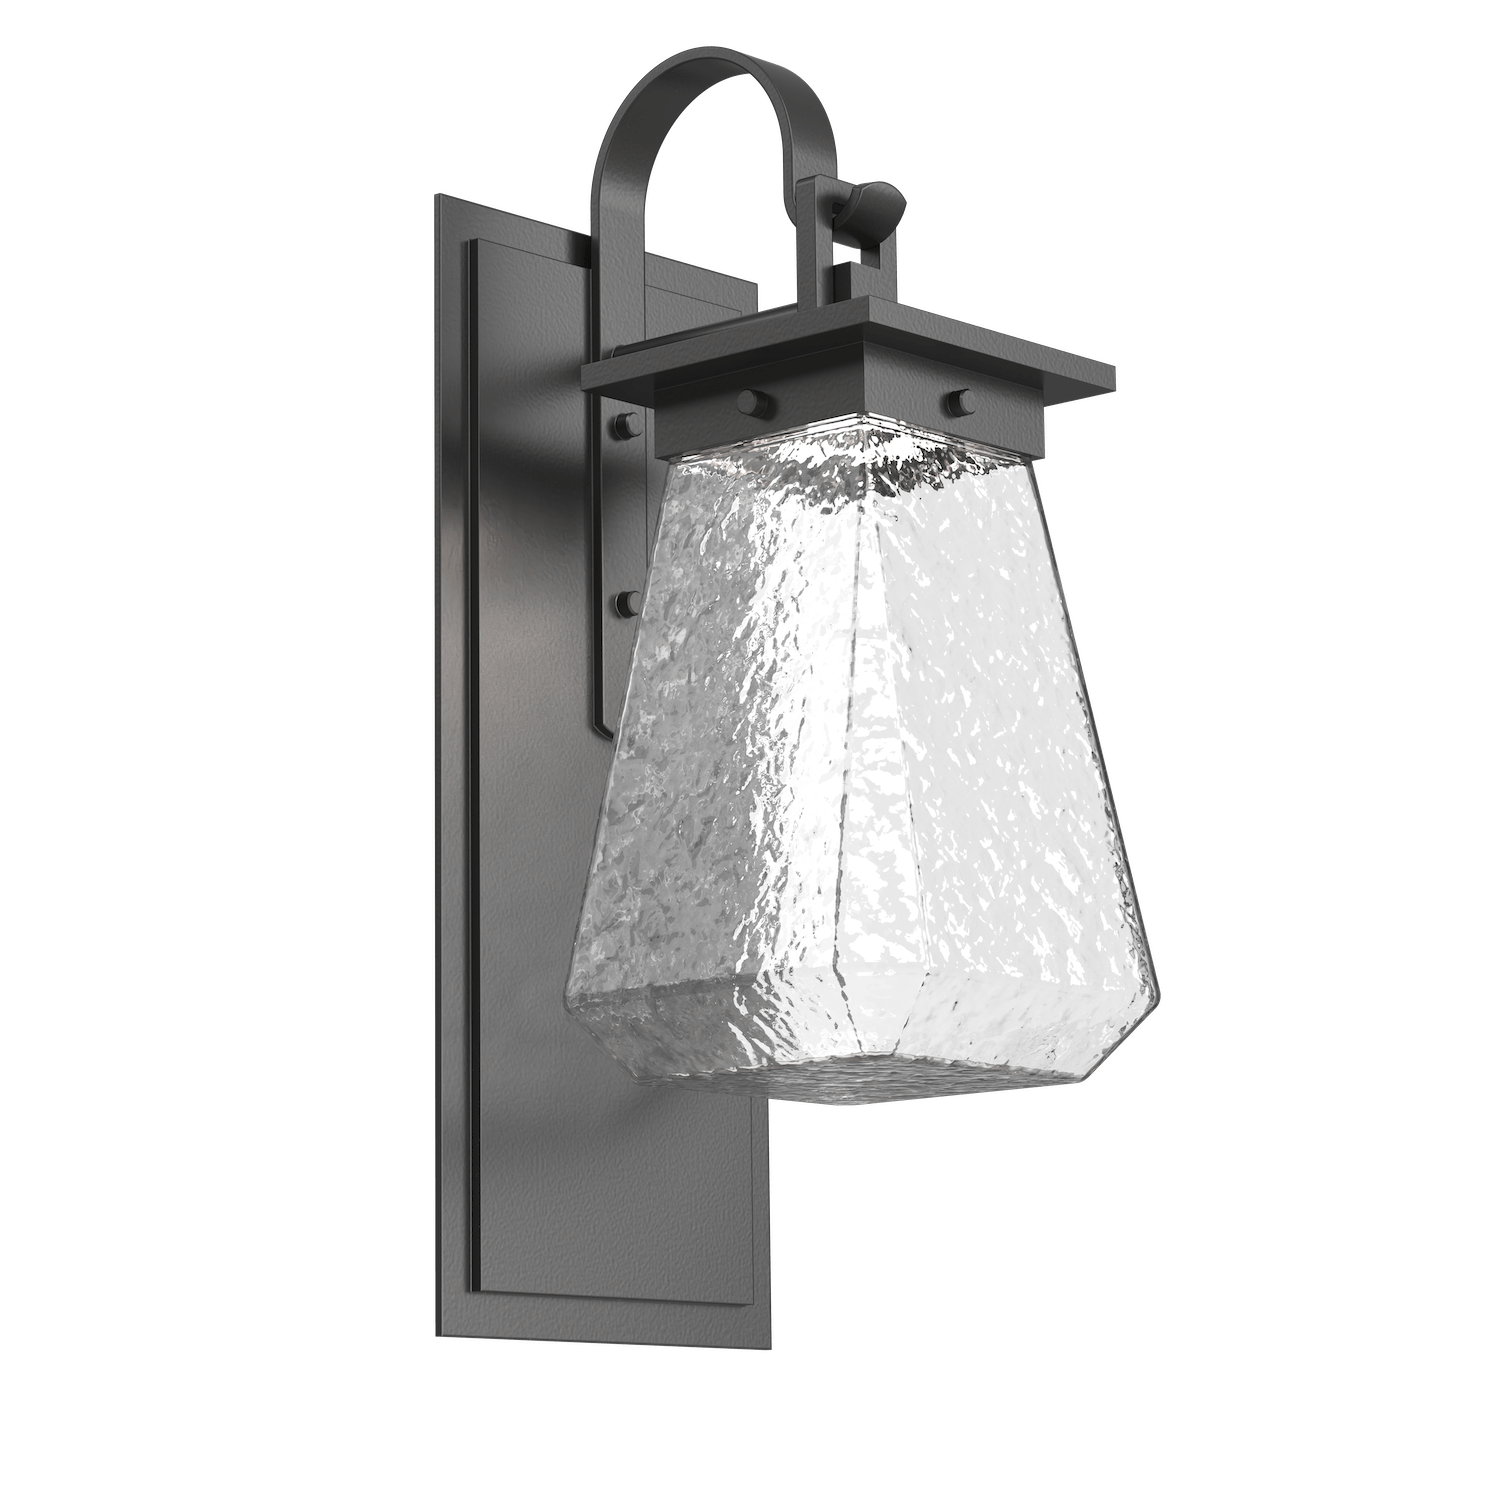 ODB0043-AC-AG-C-Hammerton-Studio-Beacon-18-inch-outdoor-sconce-with-shepherds-hook-with-argento-grey-finish-and-clear-blown-glass-shades-and-LED-lamping